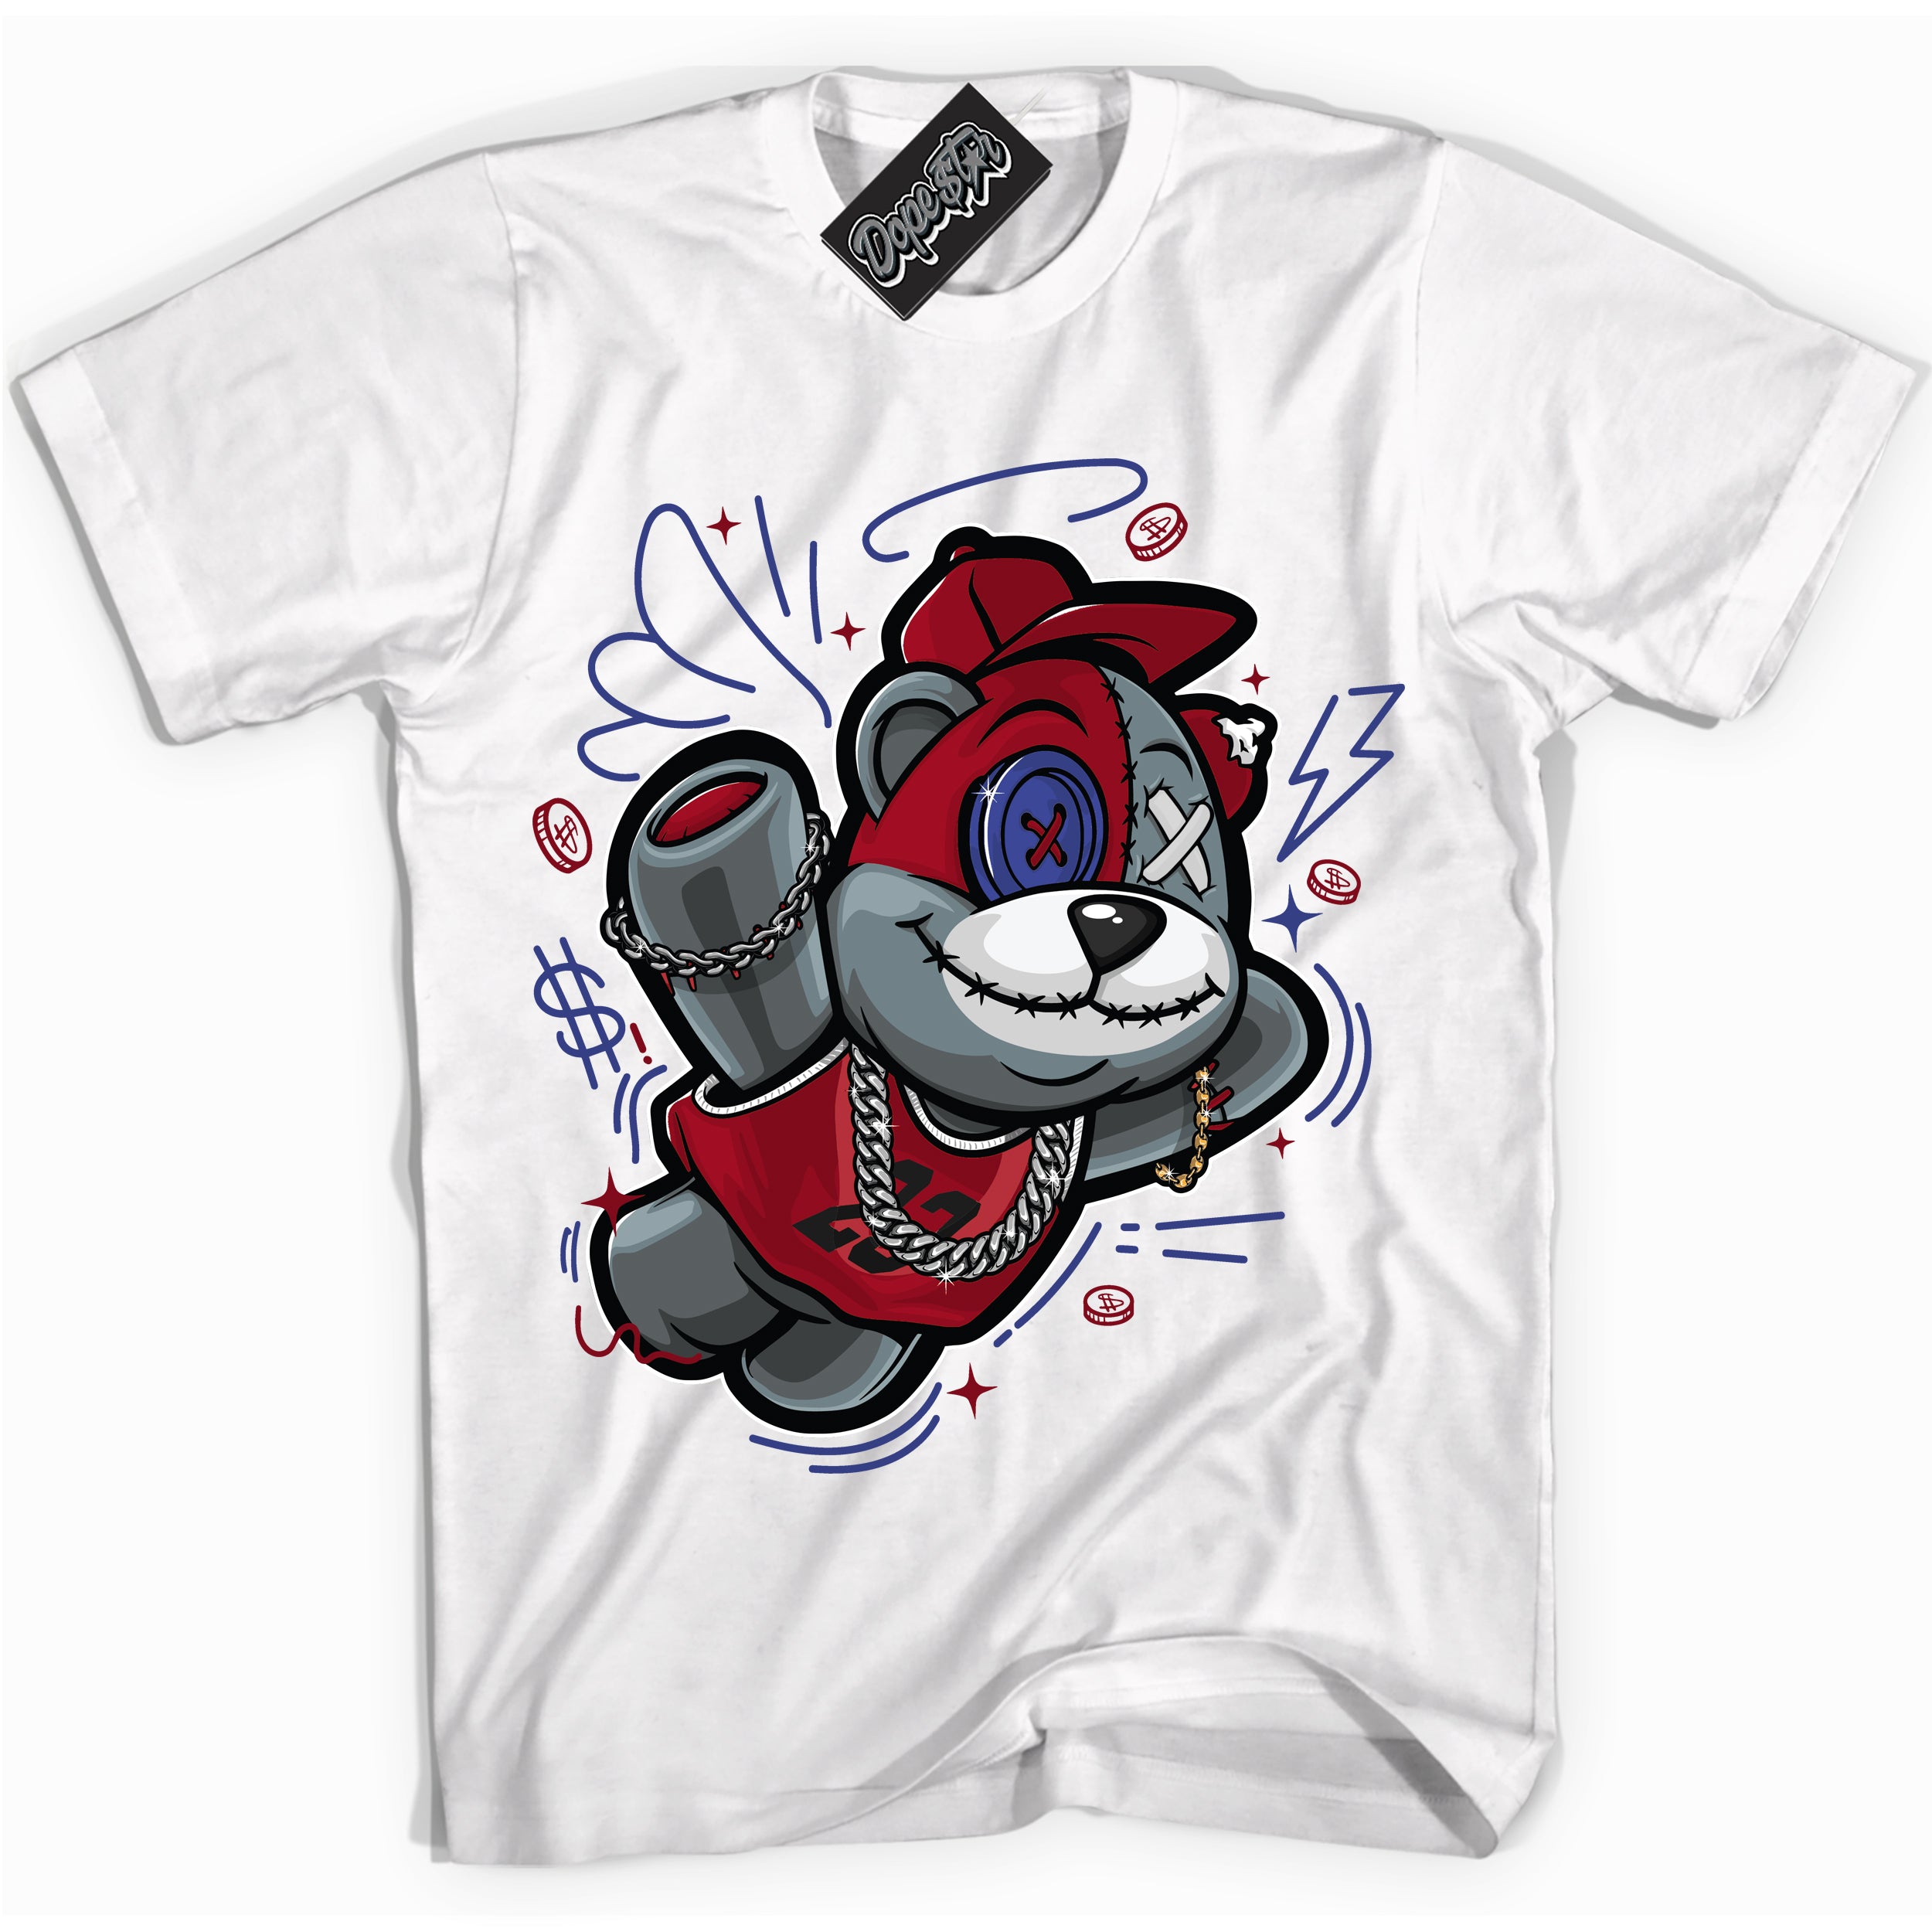 Cool White Shirt with “ Slam Dunk Bear ” design that perfectly matches Playoffs 8s Sneakers.